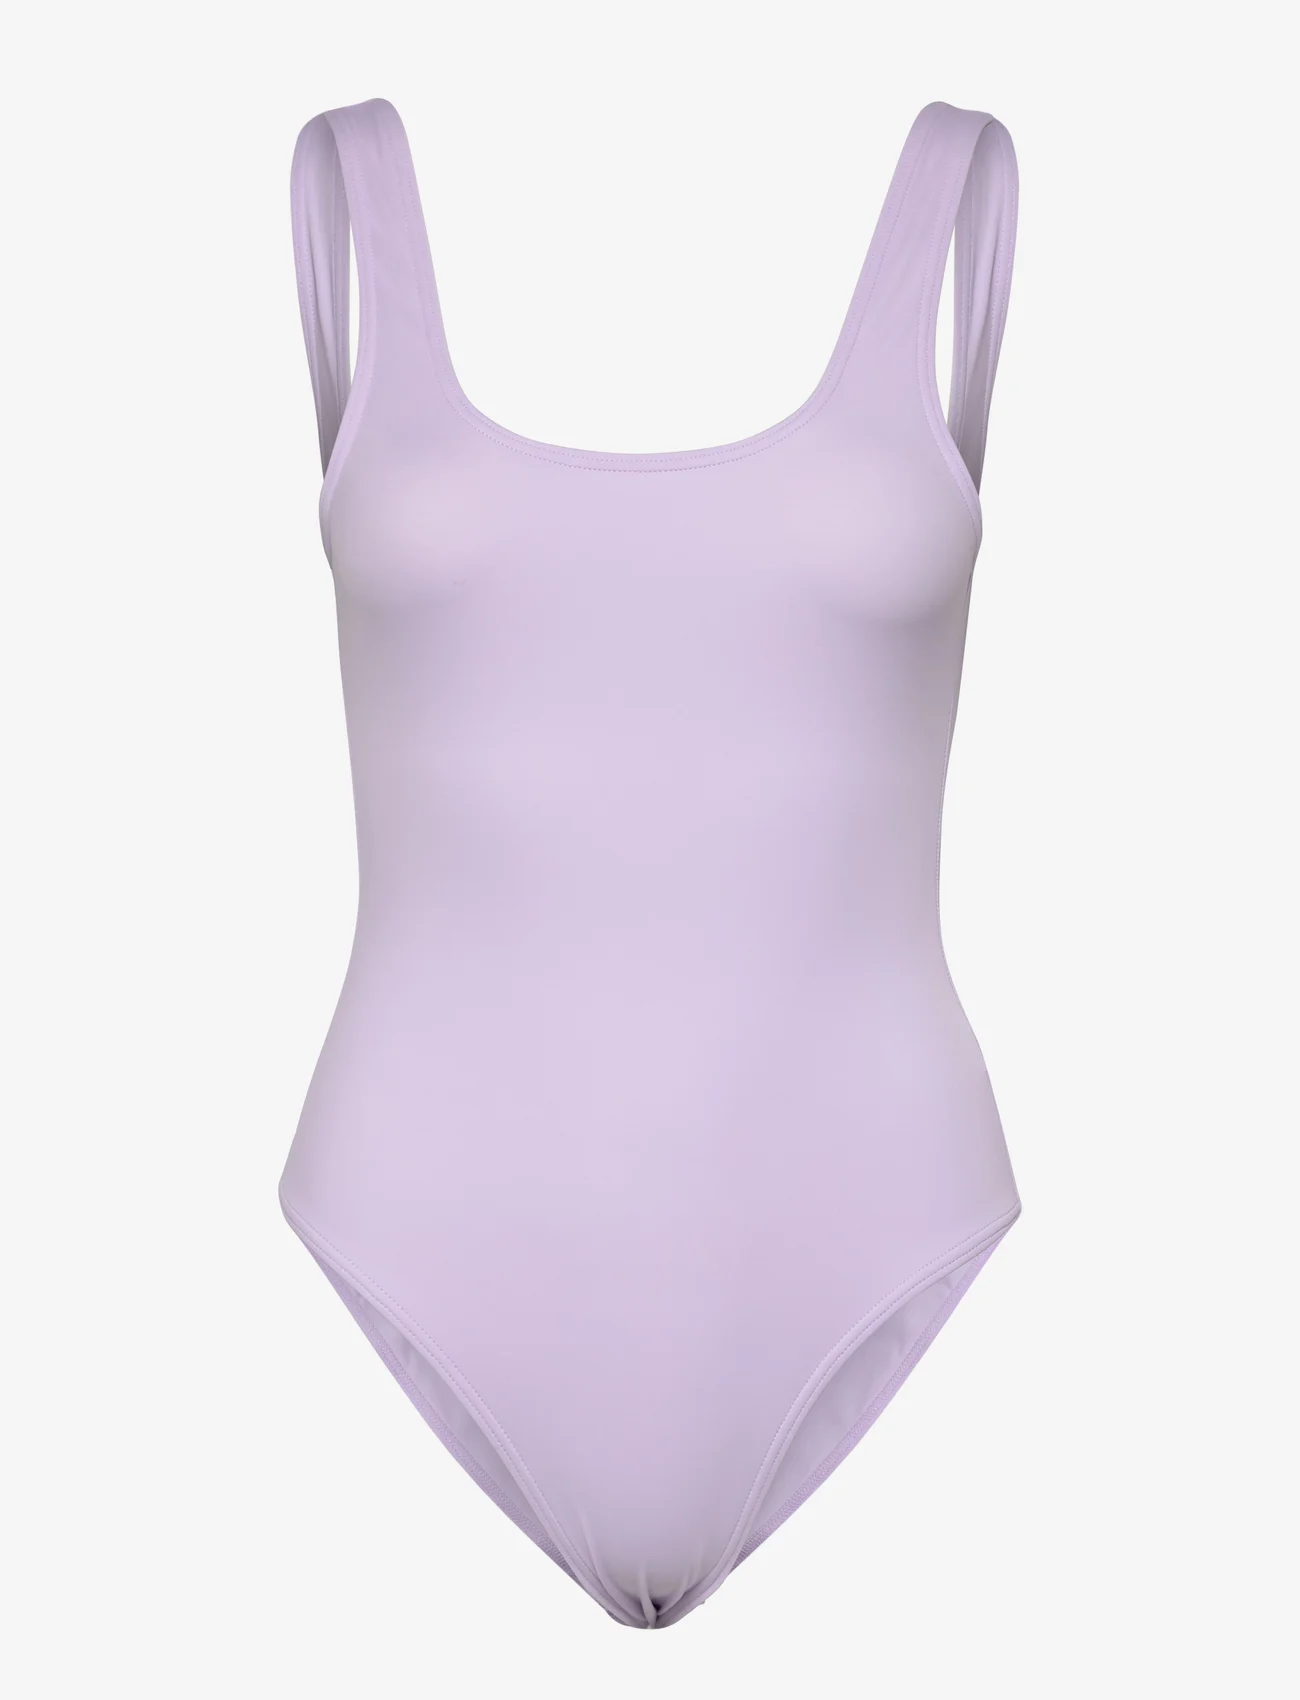 OW Collection - HANNA Swimsuit - badedragter - purple - 0